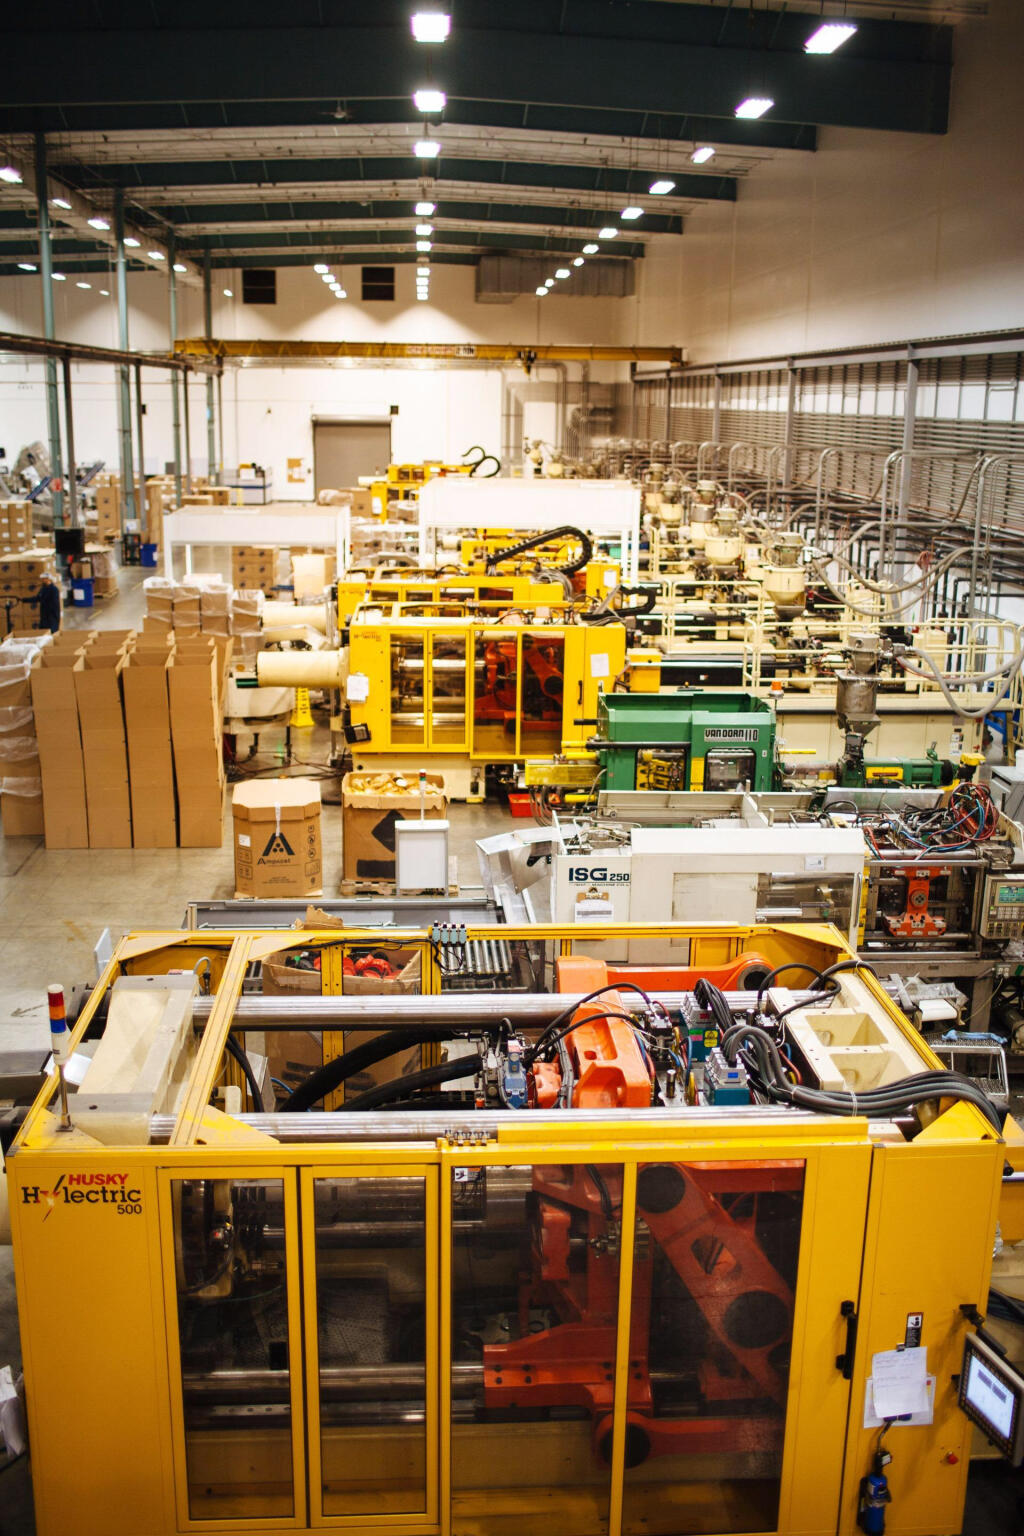 Plastic injection-molding equipment is seen on the production floor at TriMas Packaging's 160,000-square-foot facility at SOMO Village, Rohnert Park. (Courtesy: City of Rohnert Park)